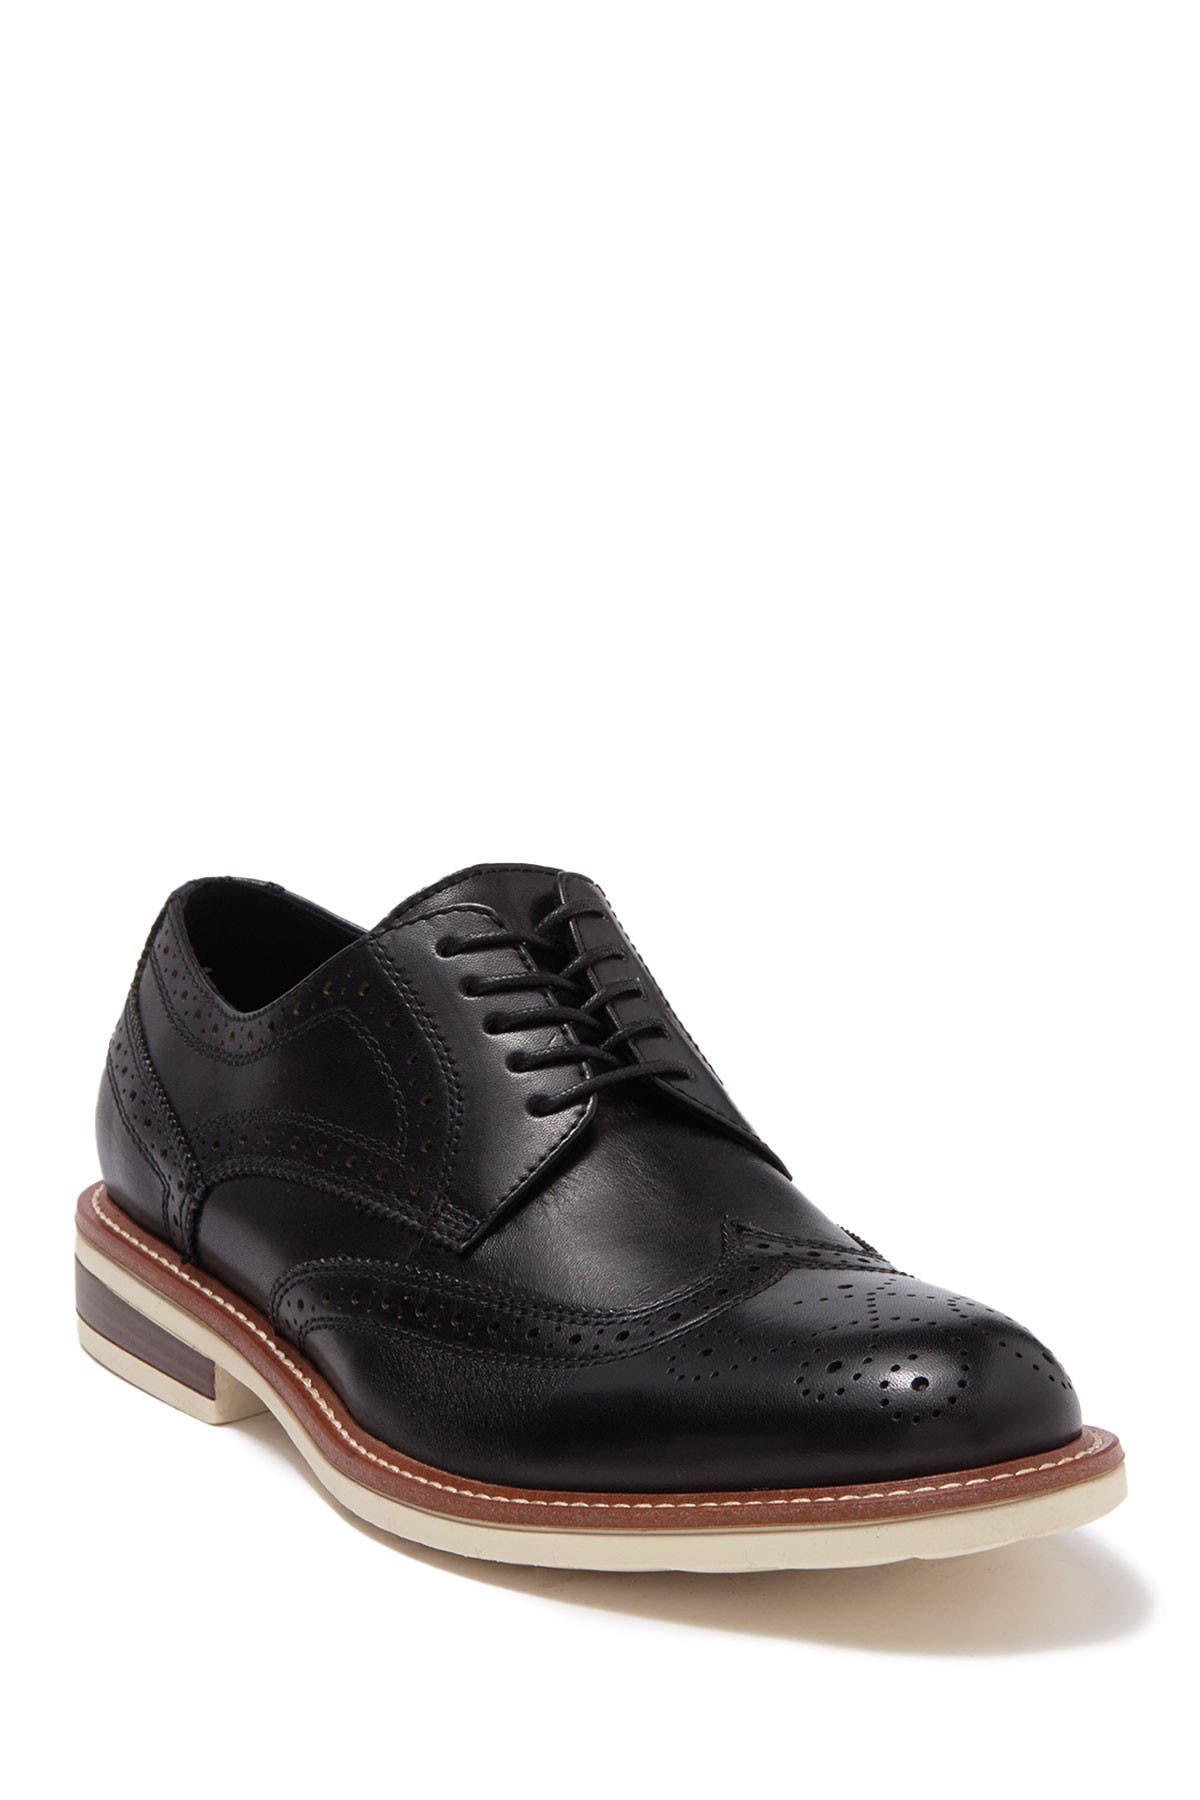 Kenneth Cole Reaction Mens Big & Tall Reaction Settle Oxford Shoes